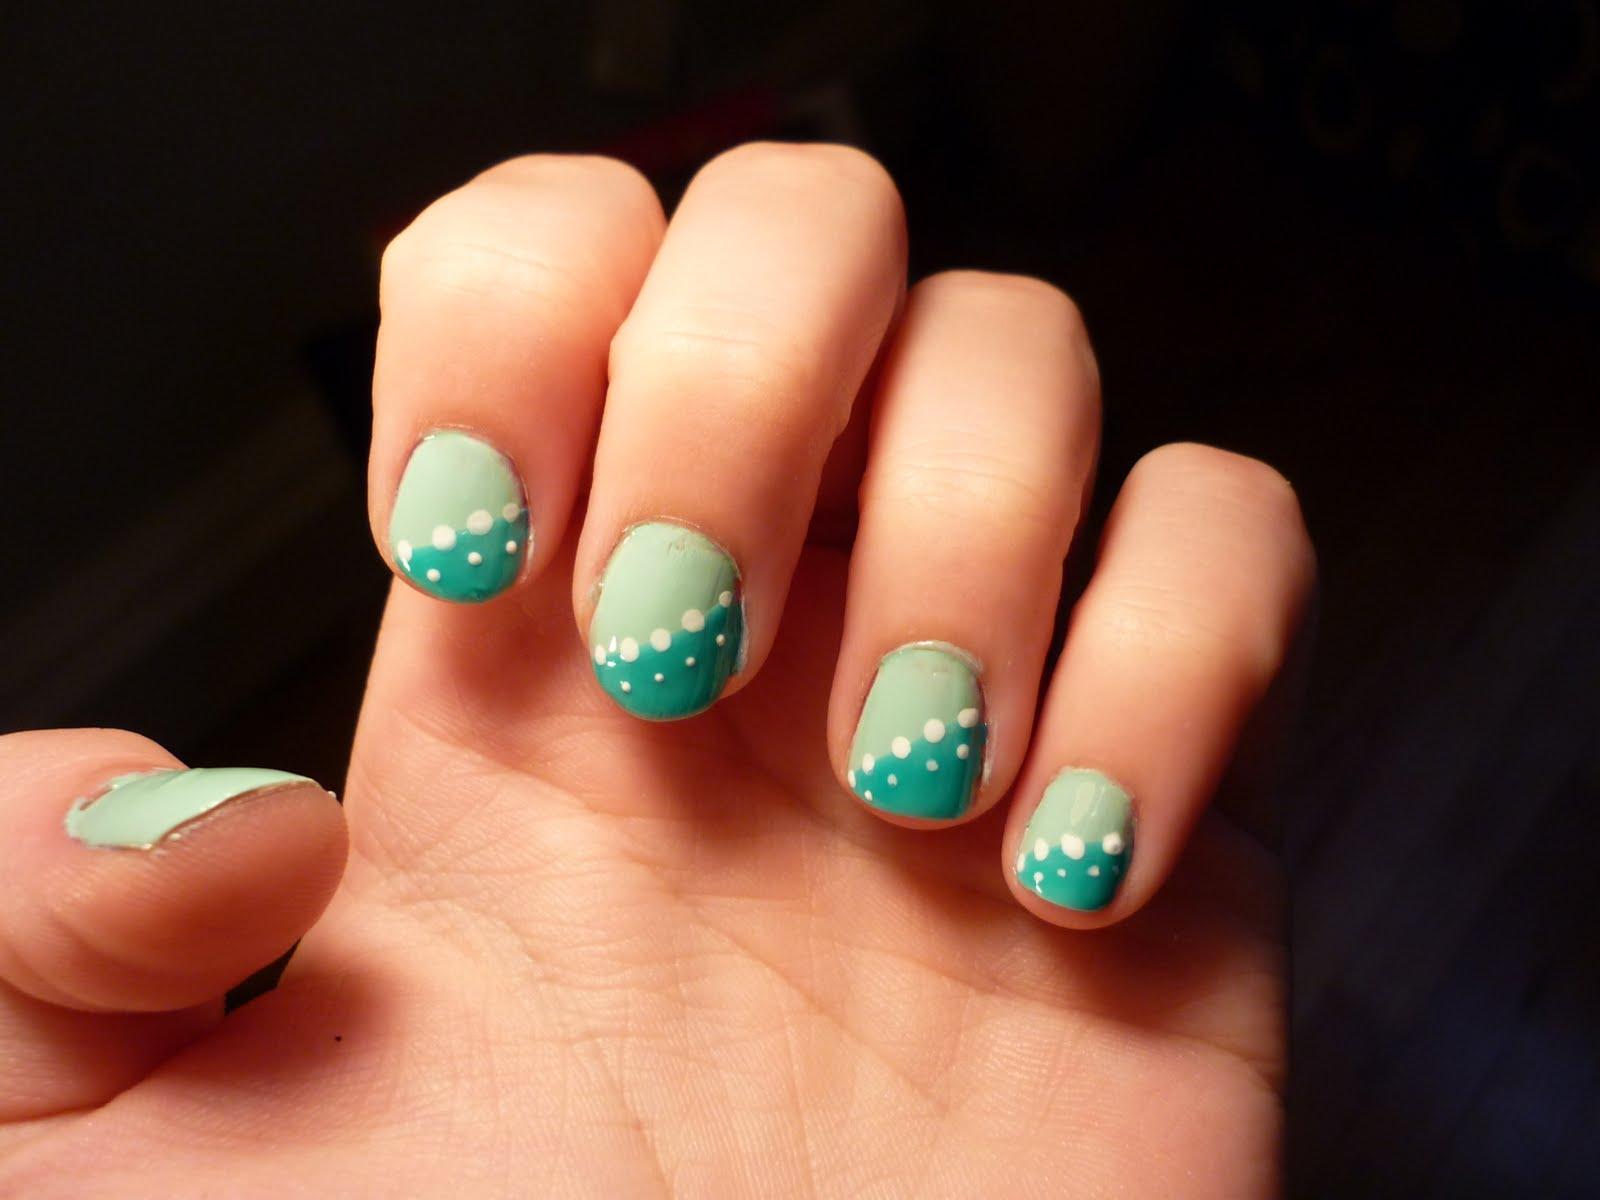 10. Easy Nail Art Designs Using Only 3 Colors - wide 6